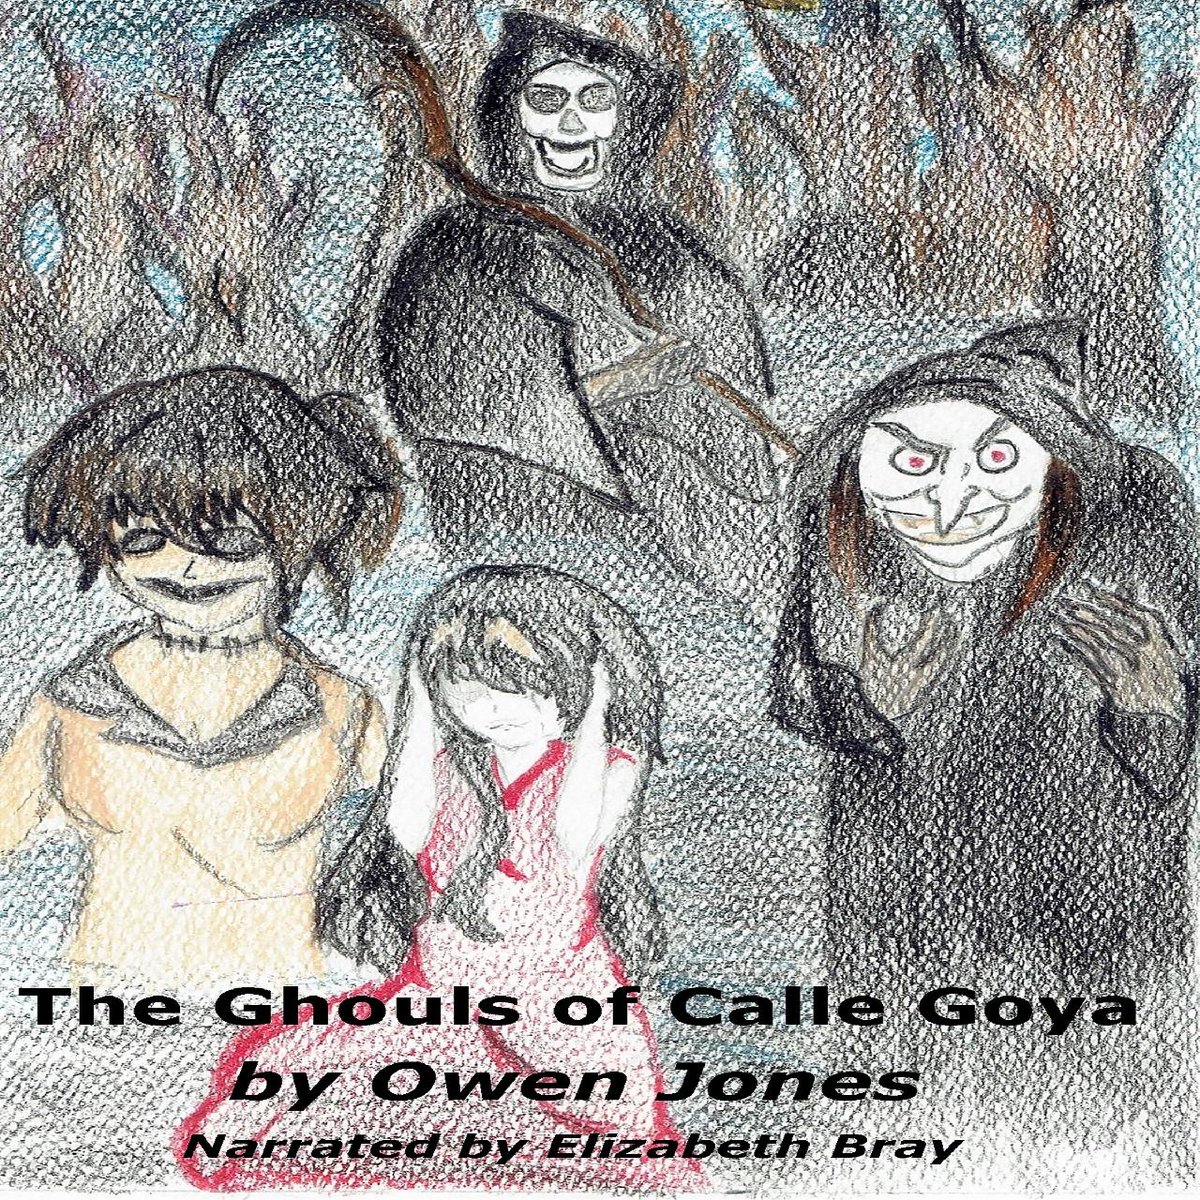 THE GHOULS OF CALLE GOYA - Frank, an older bachelor, takes his Thai wife to the Costa del Sol for their honeymoon. They are in Nirvana, until the ghouls of a secret Scandinavian society torment Joy to the point of seeking death. Based on a true story.
https://t.co/Y7wTFFSmoE https://t.co/JRTyLwM1Dm